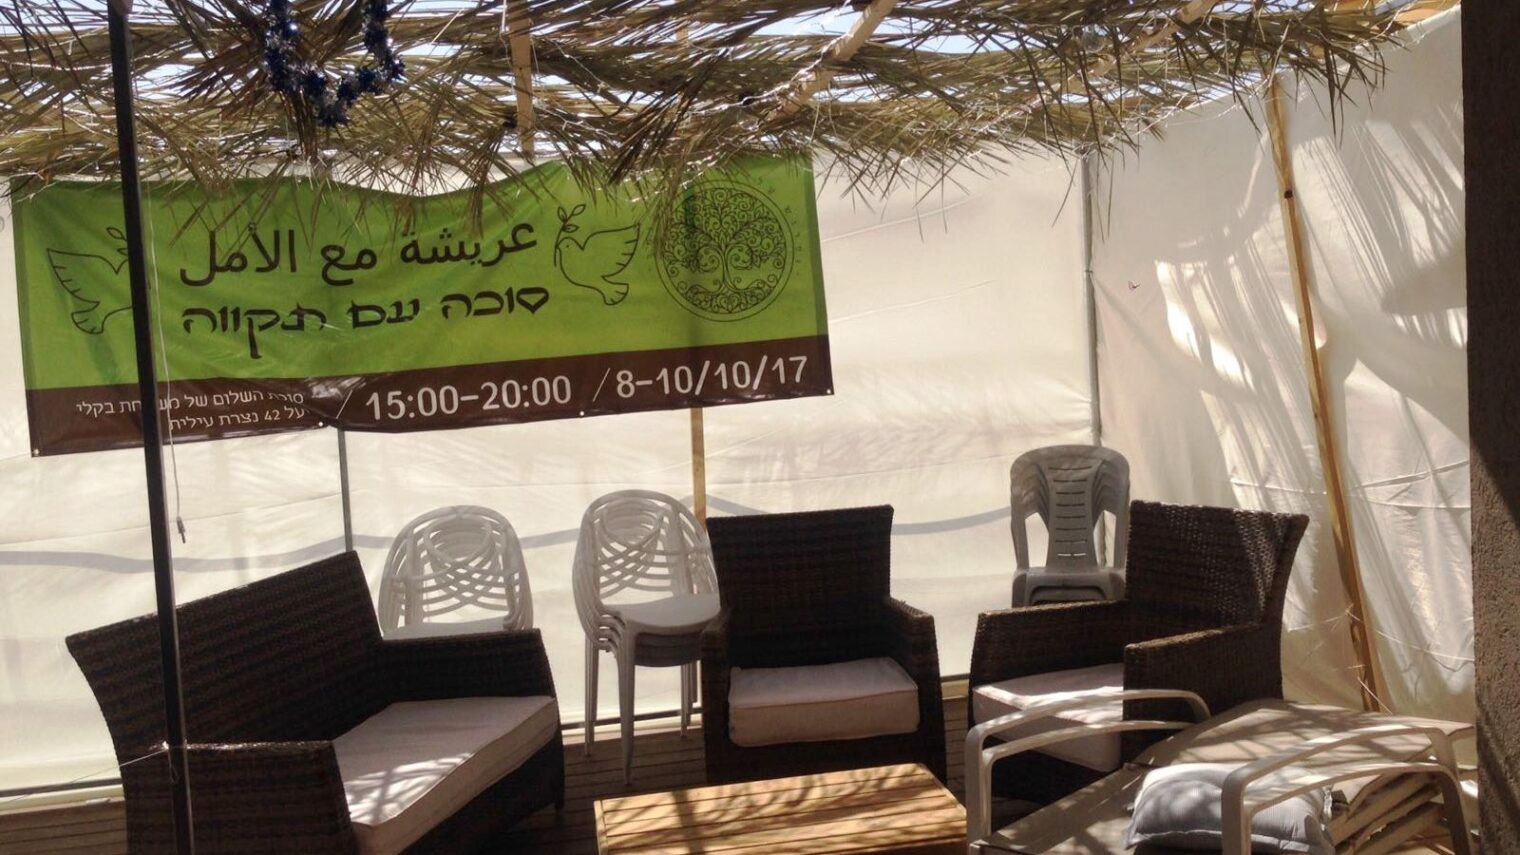 The sign reads â€œsukkah with hopeâ€� in Arabic and Hebrew. Photo courtesy of the Bakly family